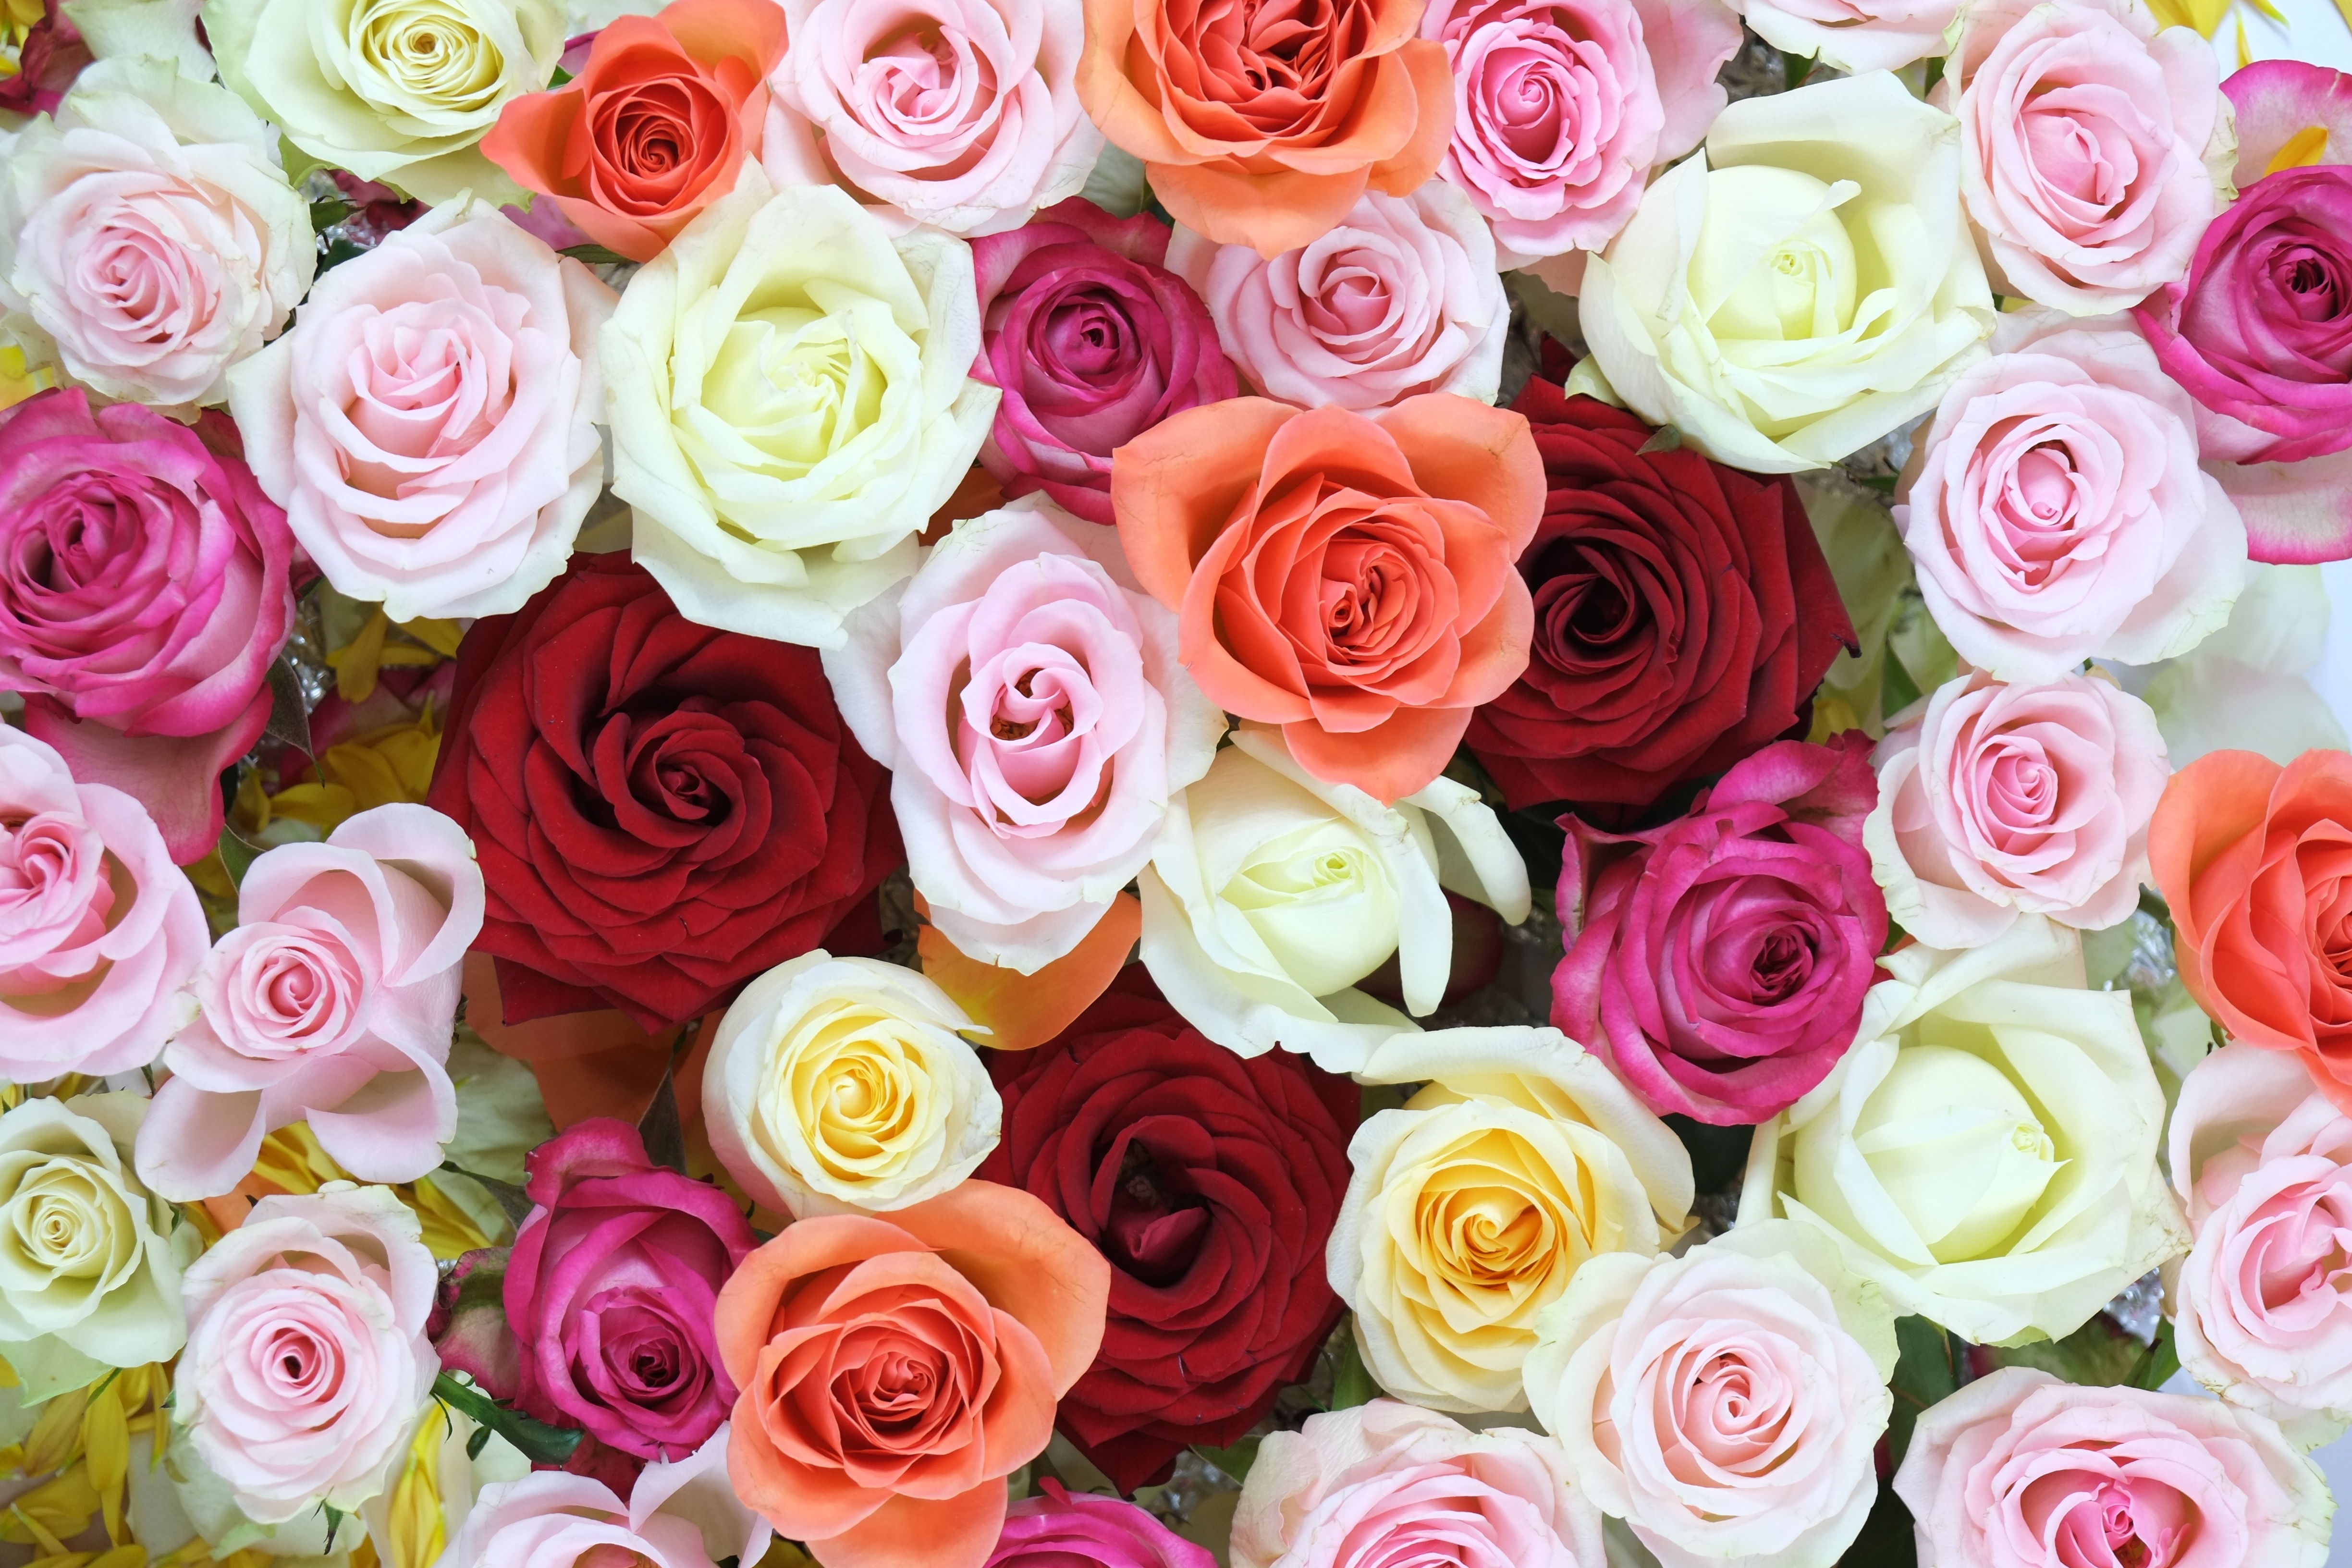 HD wallpaper, Floral Background, Multicolor, 5K, Rose Flowers, Colorful, Beautiful, Blossom